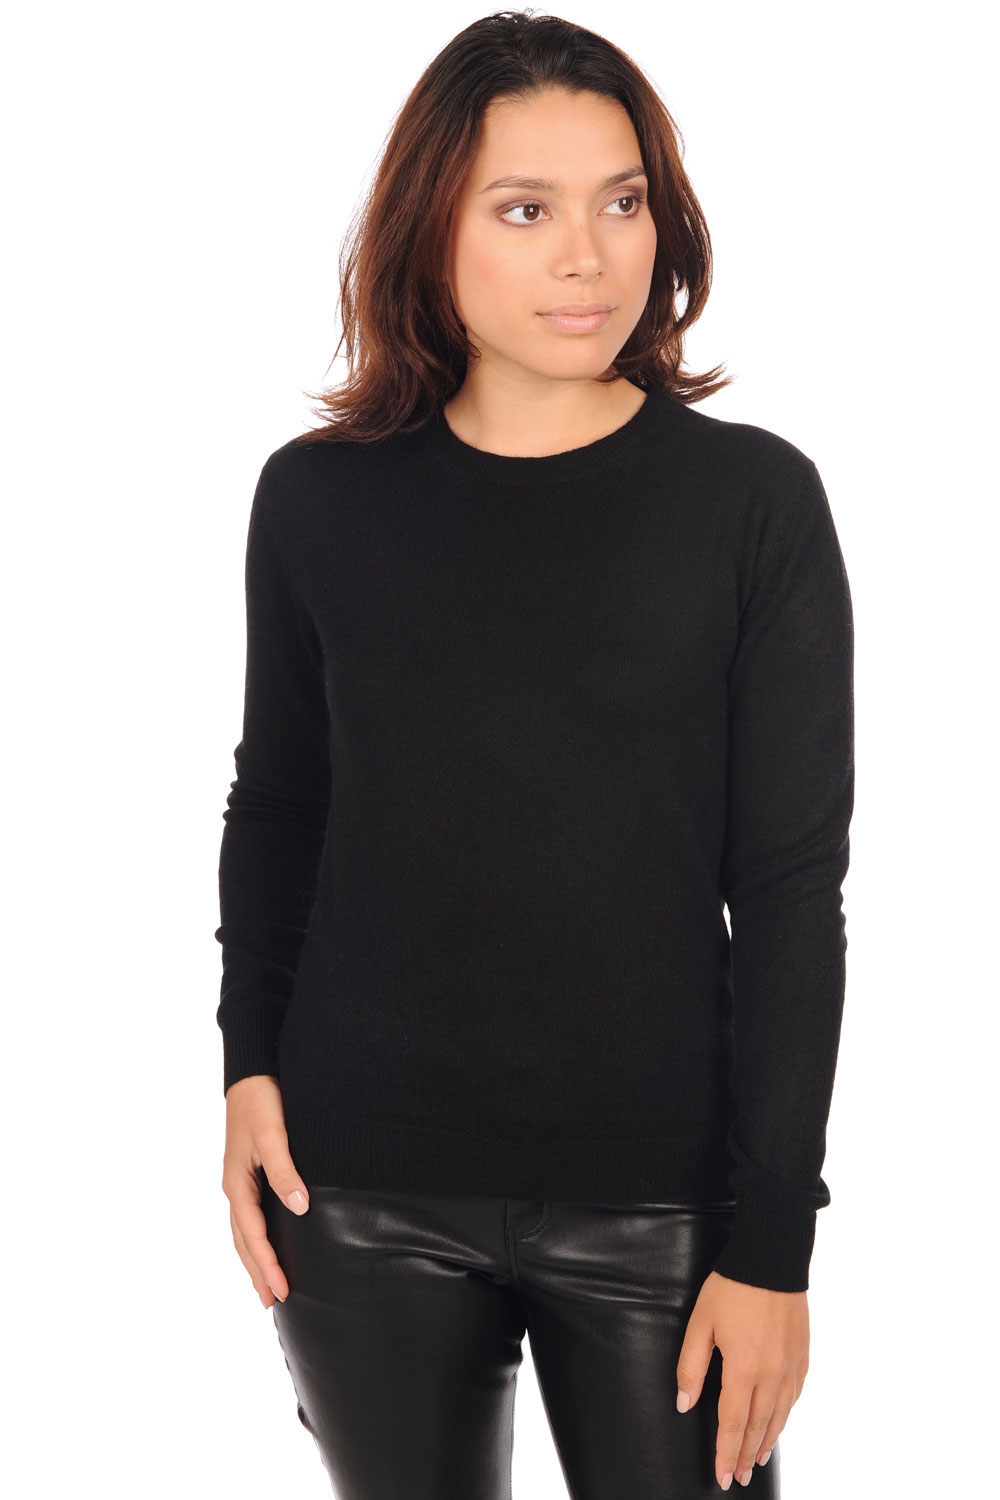 Cashmere ladies basic sweaters at low prices thalia first black 2xl